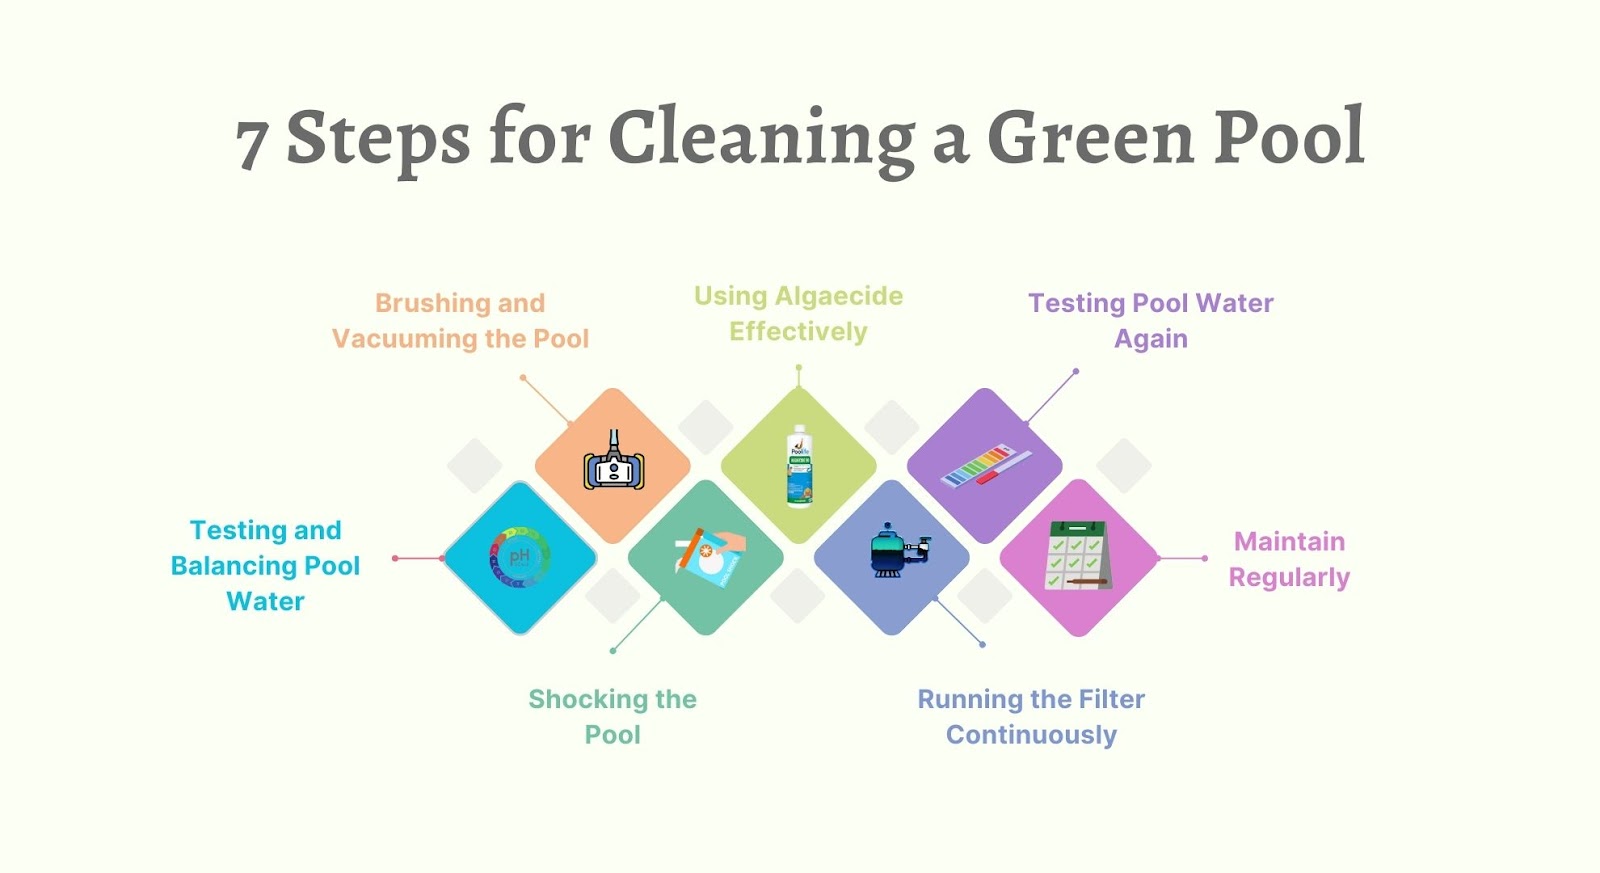 Steps for Cleaning a Green Pool